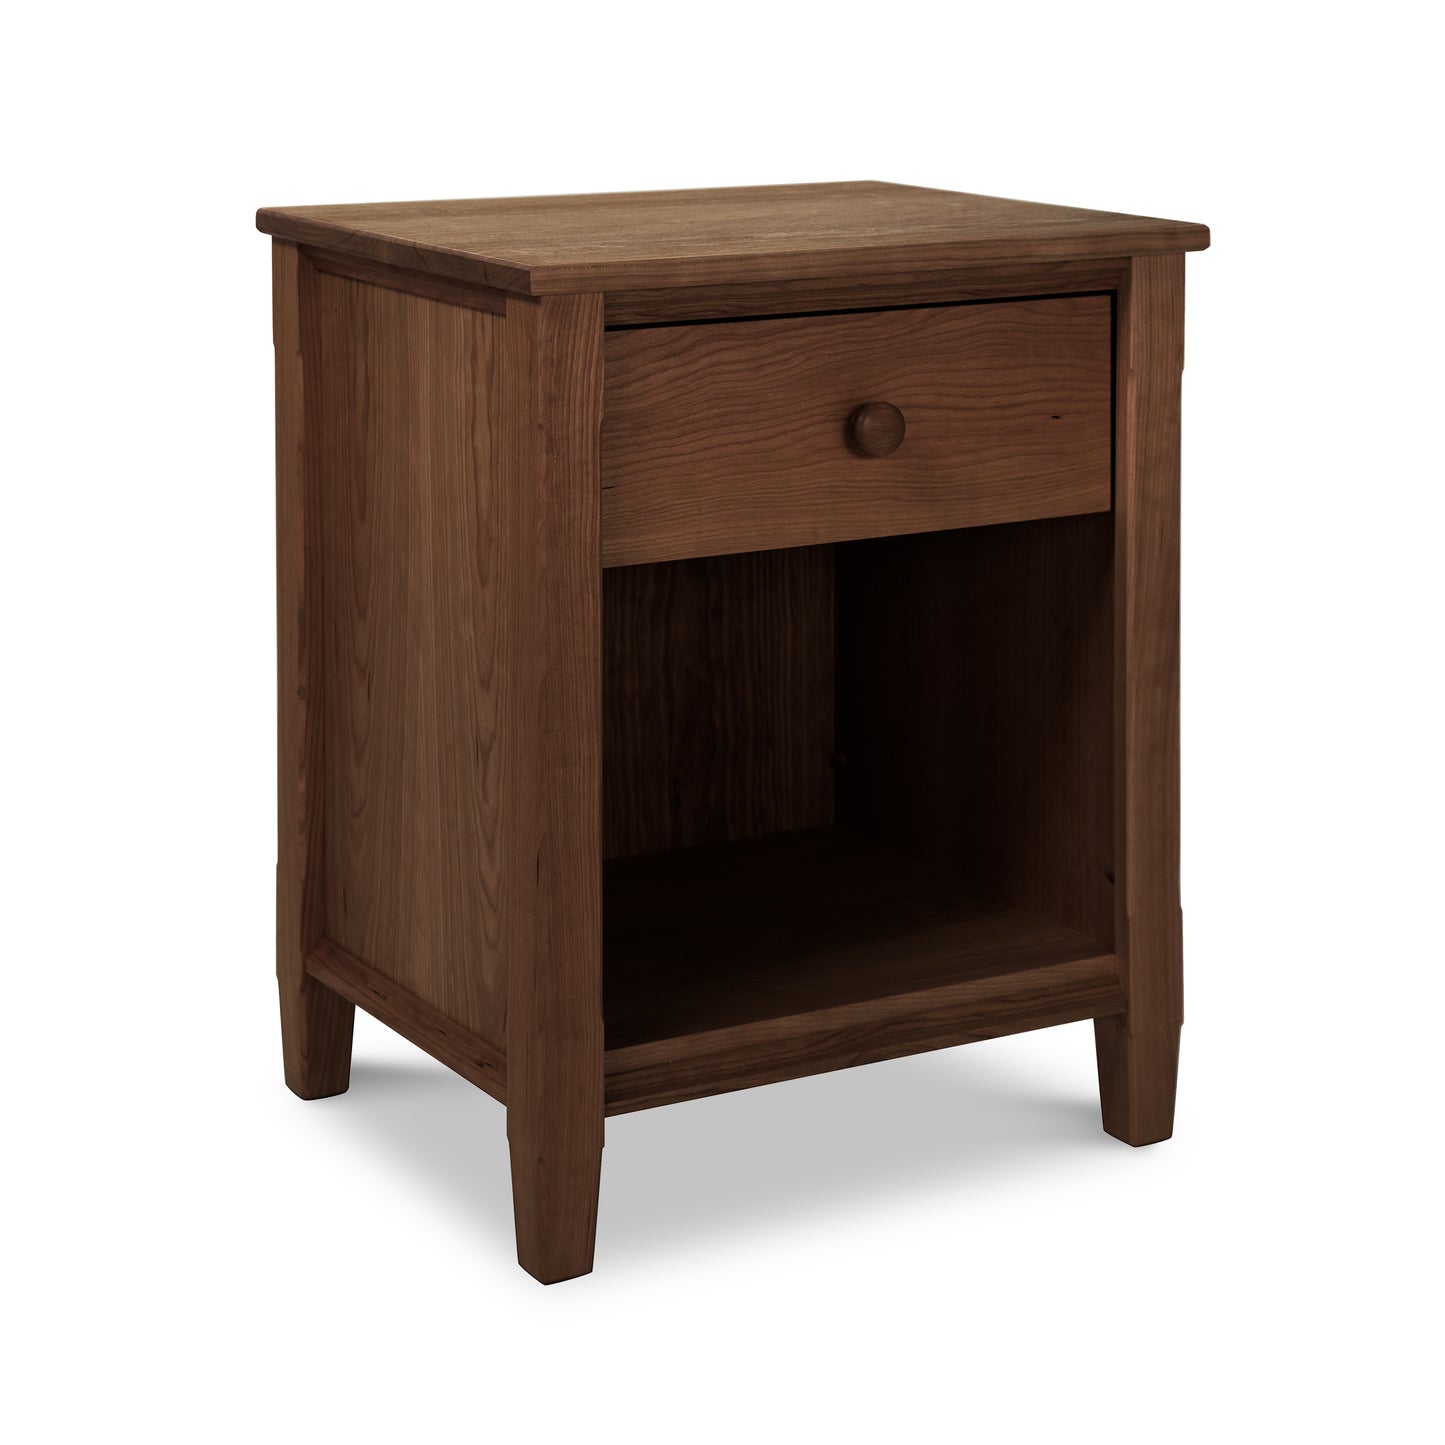 A small Maple Corner Woodworks Vermont Shaker 1-Drawer Enclosed Shelf Nightstand, showcasing exquisite Vermont craftsmanship and made from natural hardwoods.